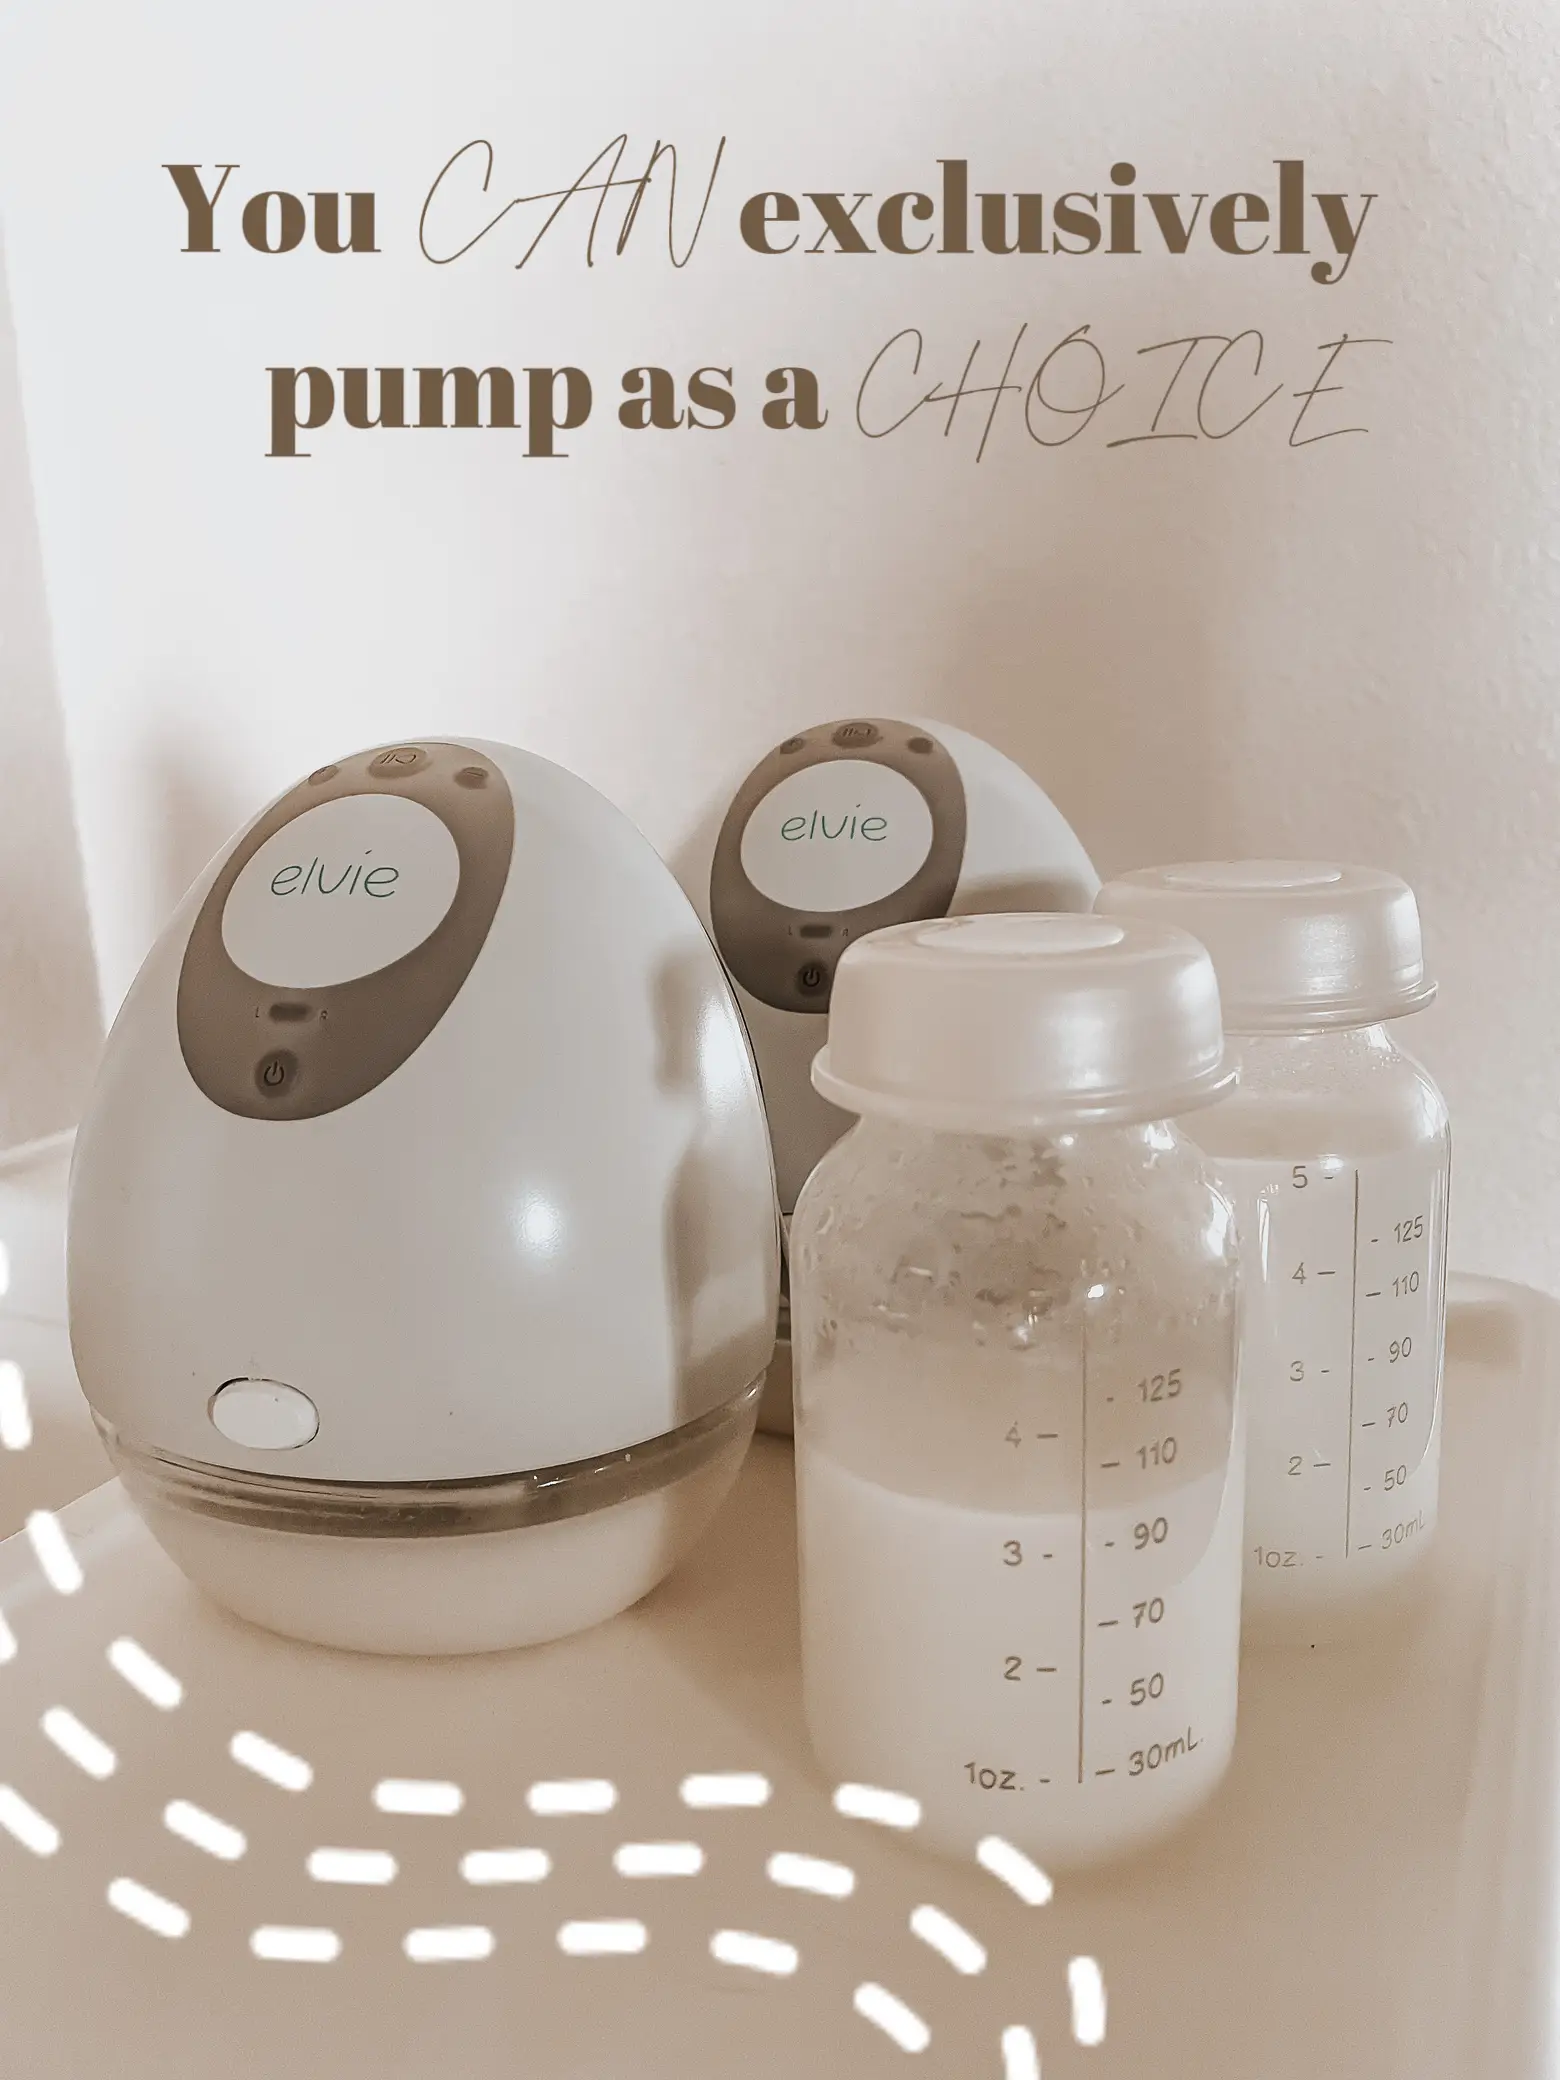 Exclusively Pumping Mama: Elvie VS Spectra & Which I Honestly Like